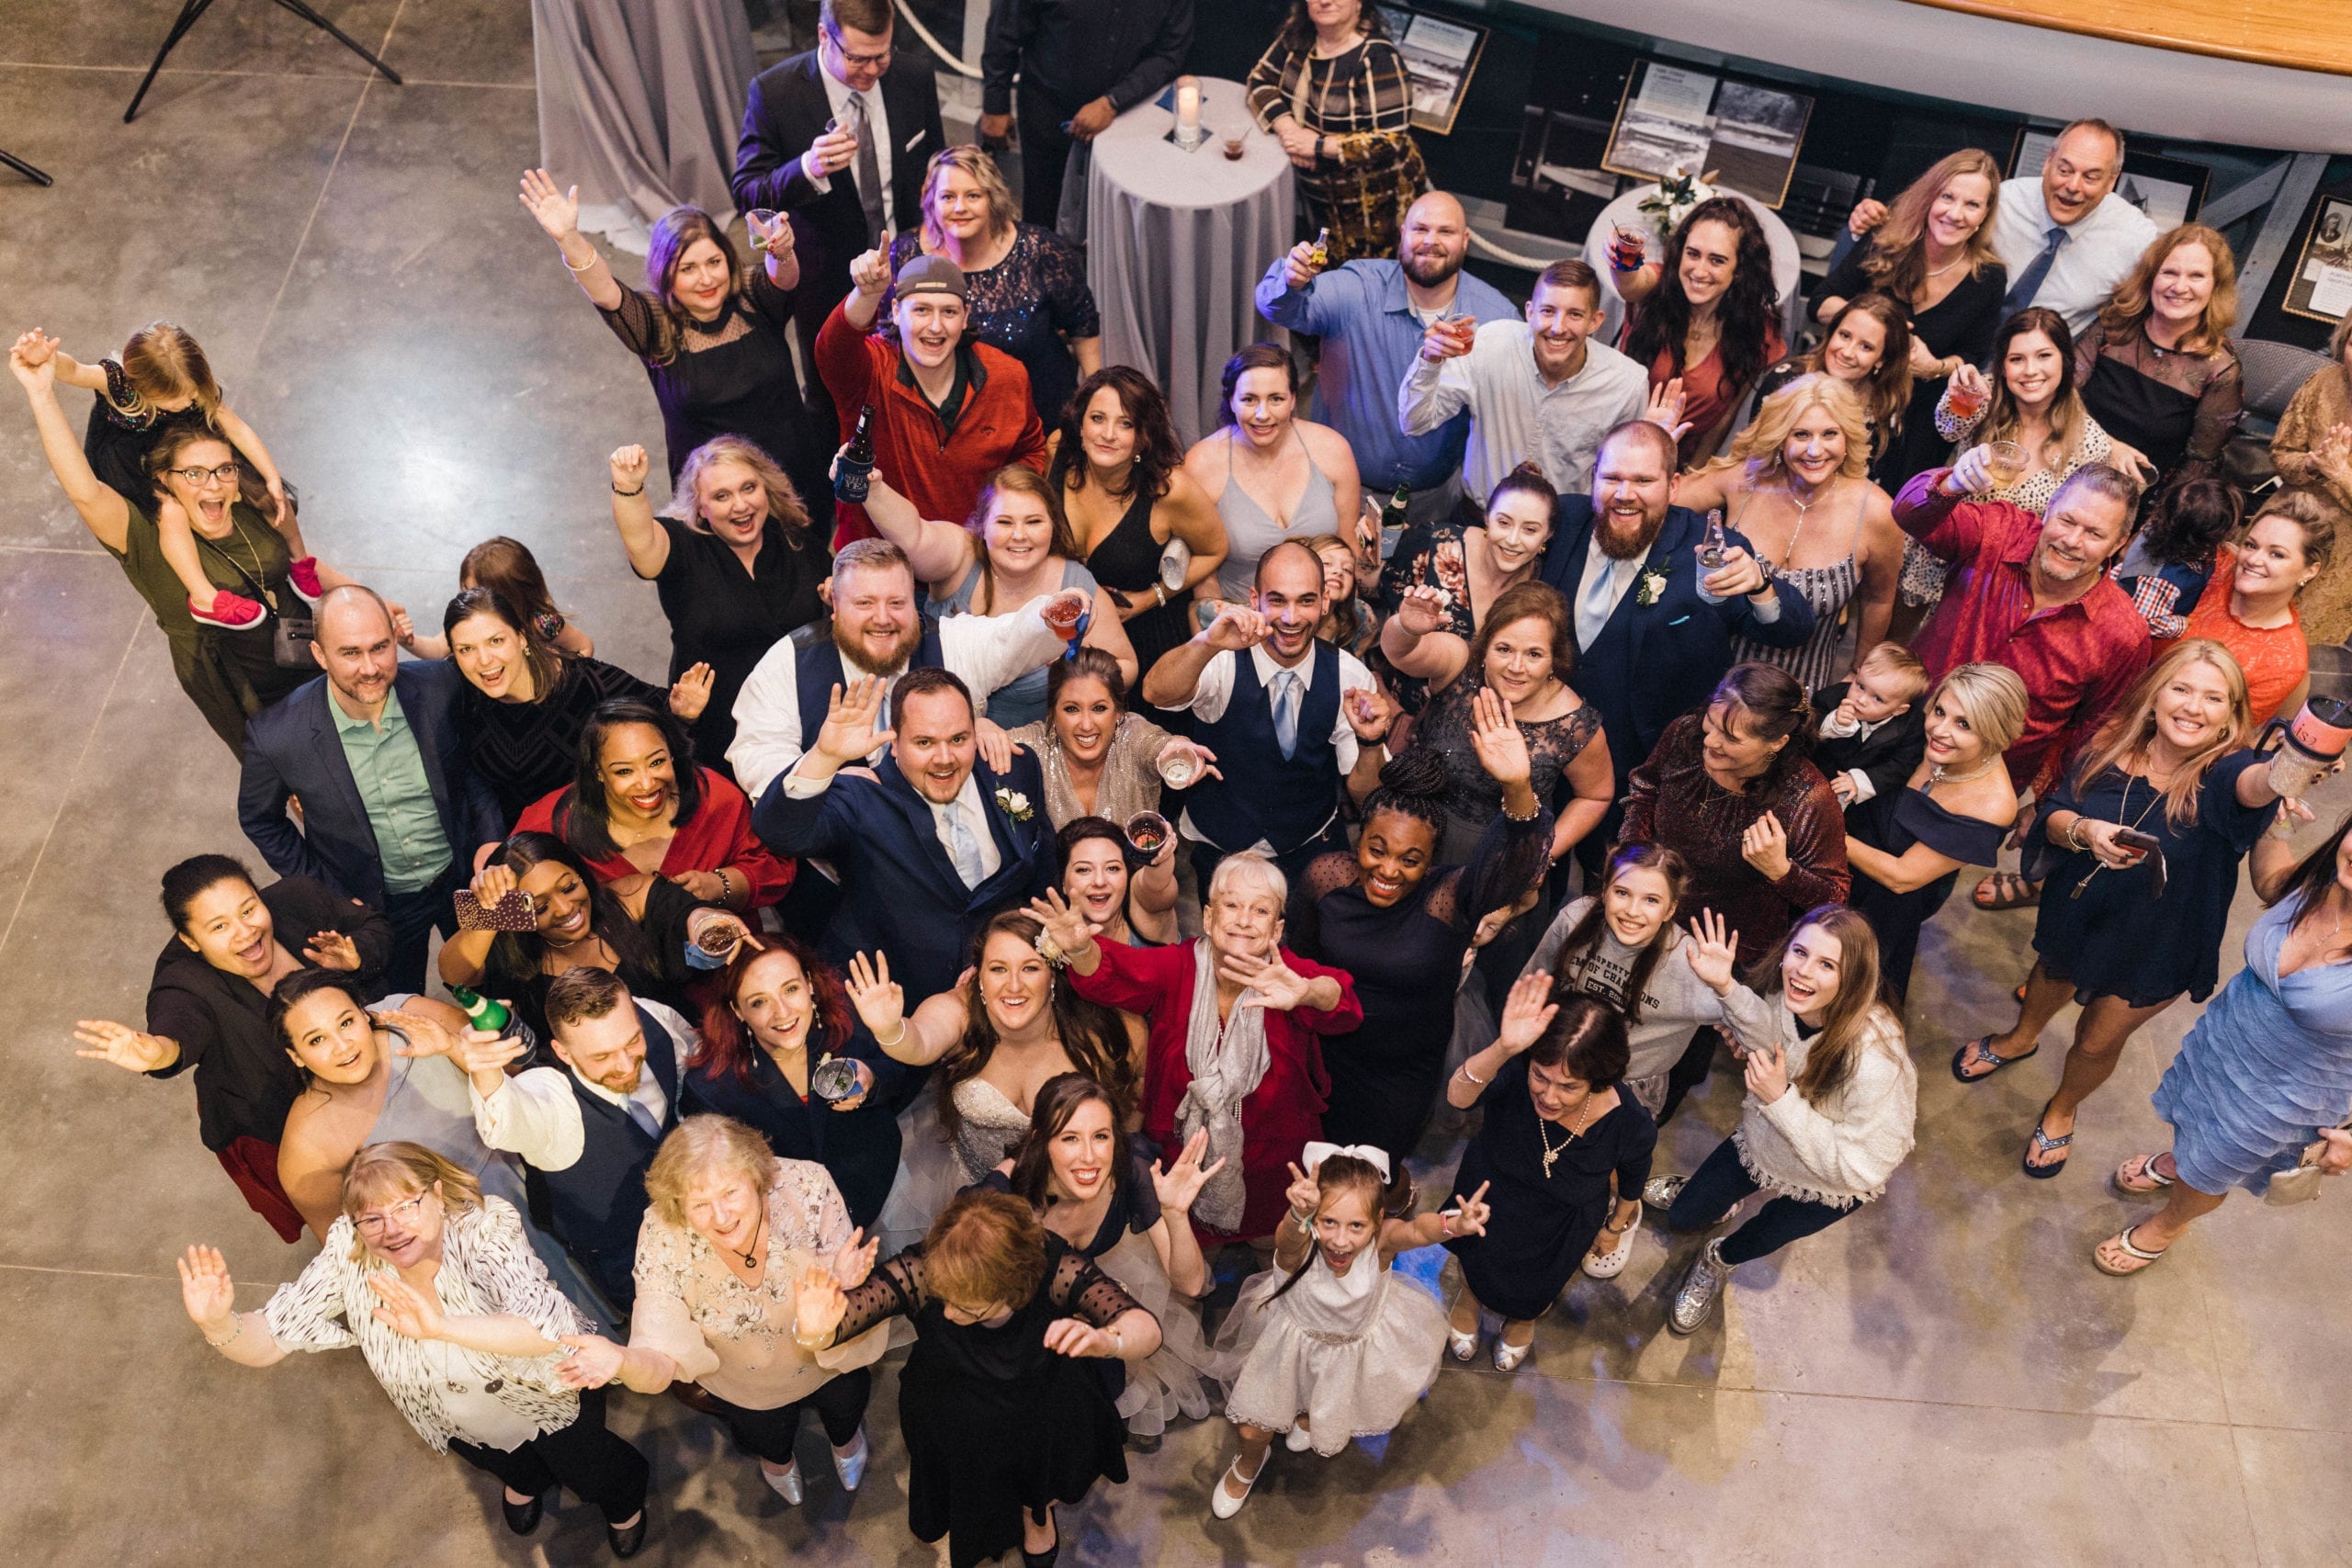 Maritime and Seafood Industry Museum wedding reception group photo